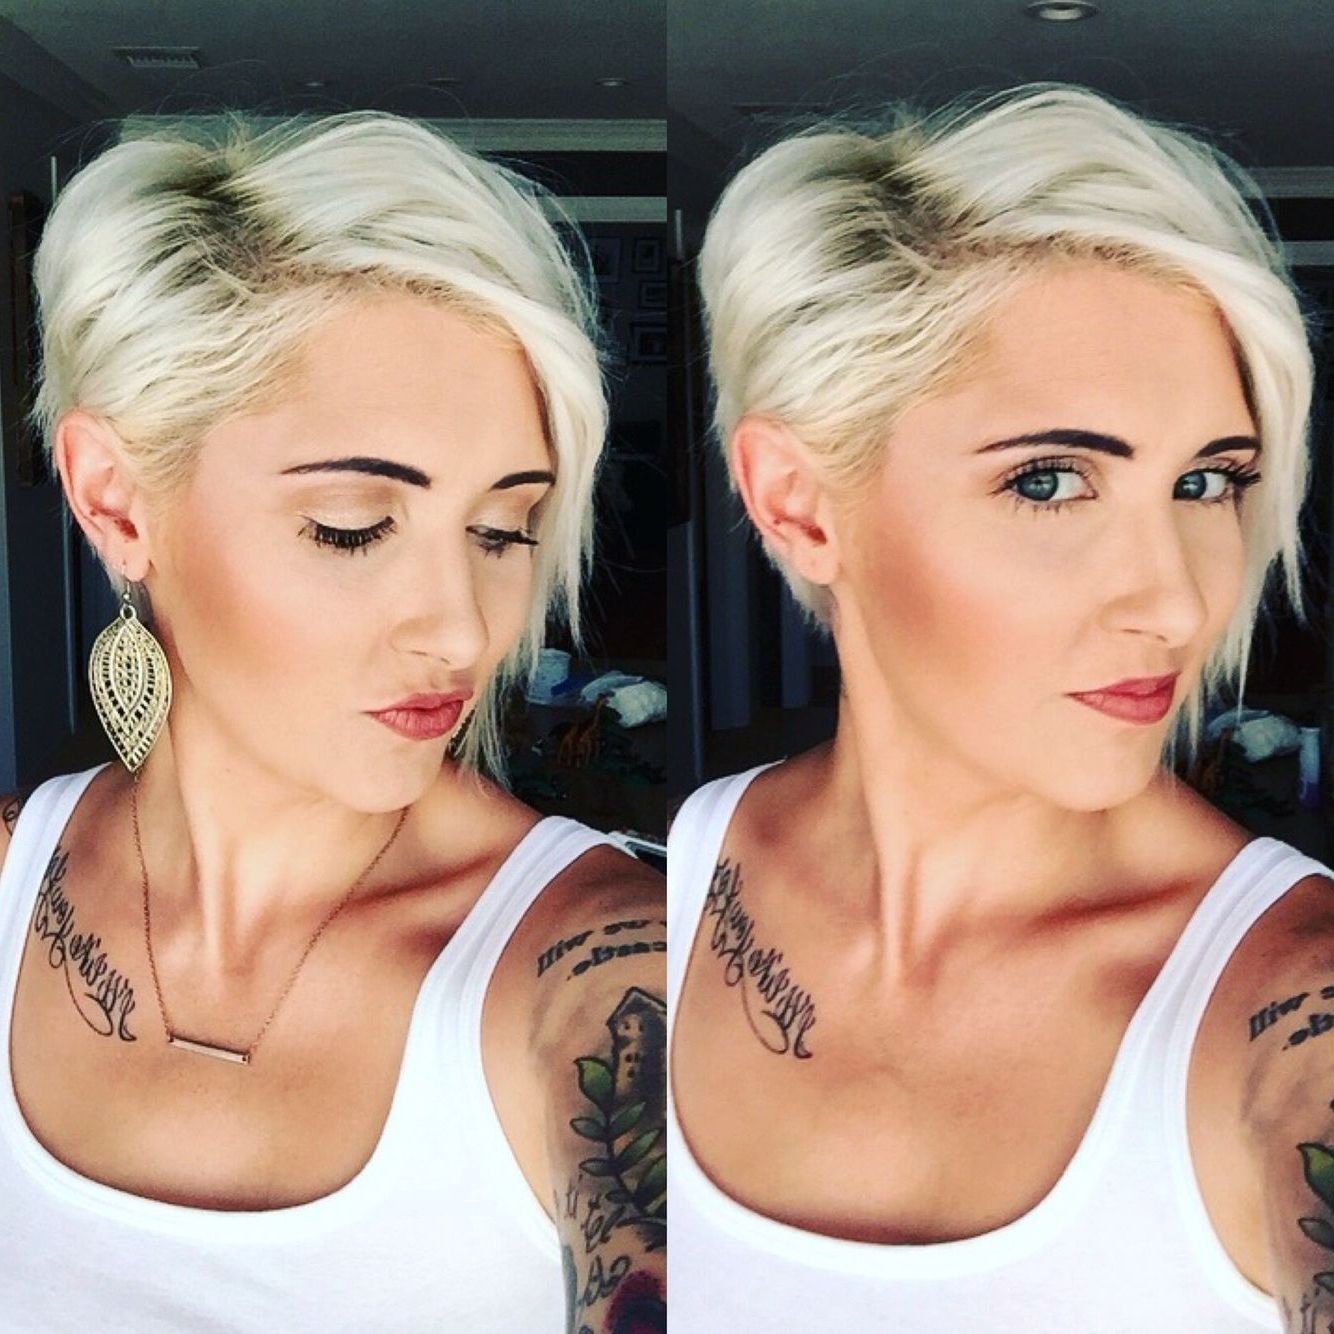 Platinum Blonde Pixie Haircut Ice White Hair Liquid Touch Foundation Pertaining To Recent Ashy Blonde Pixie Hairstyles With A Messy Touch (View 15 of 20)